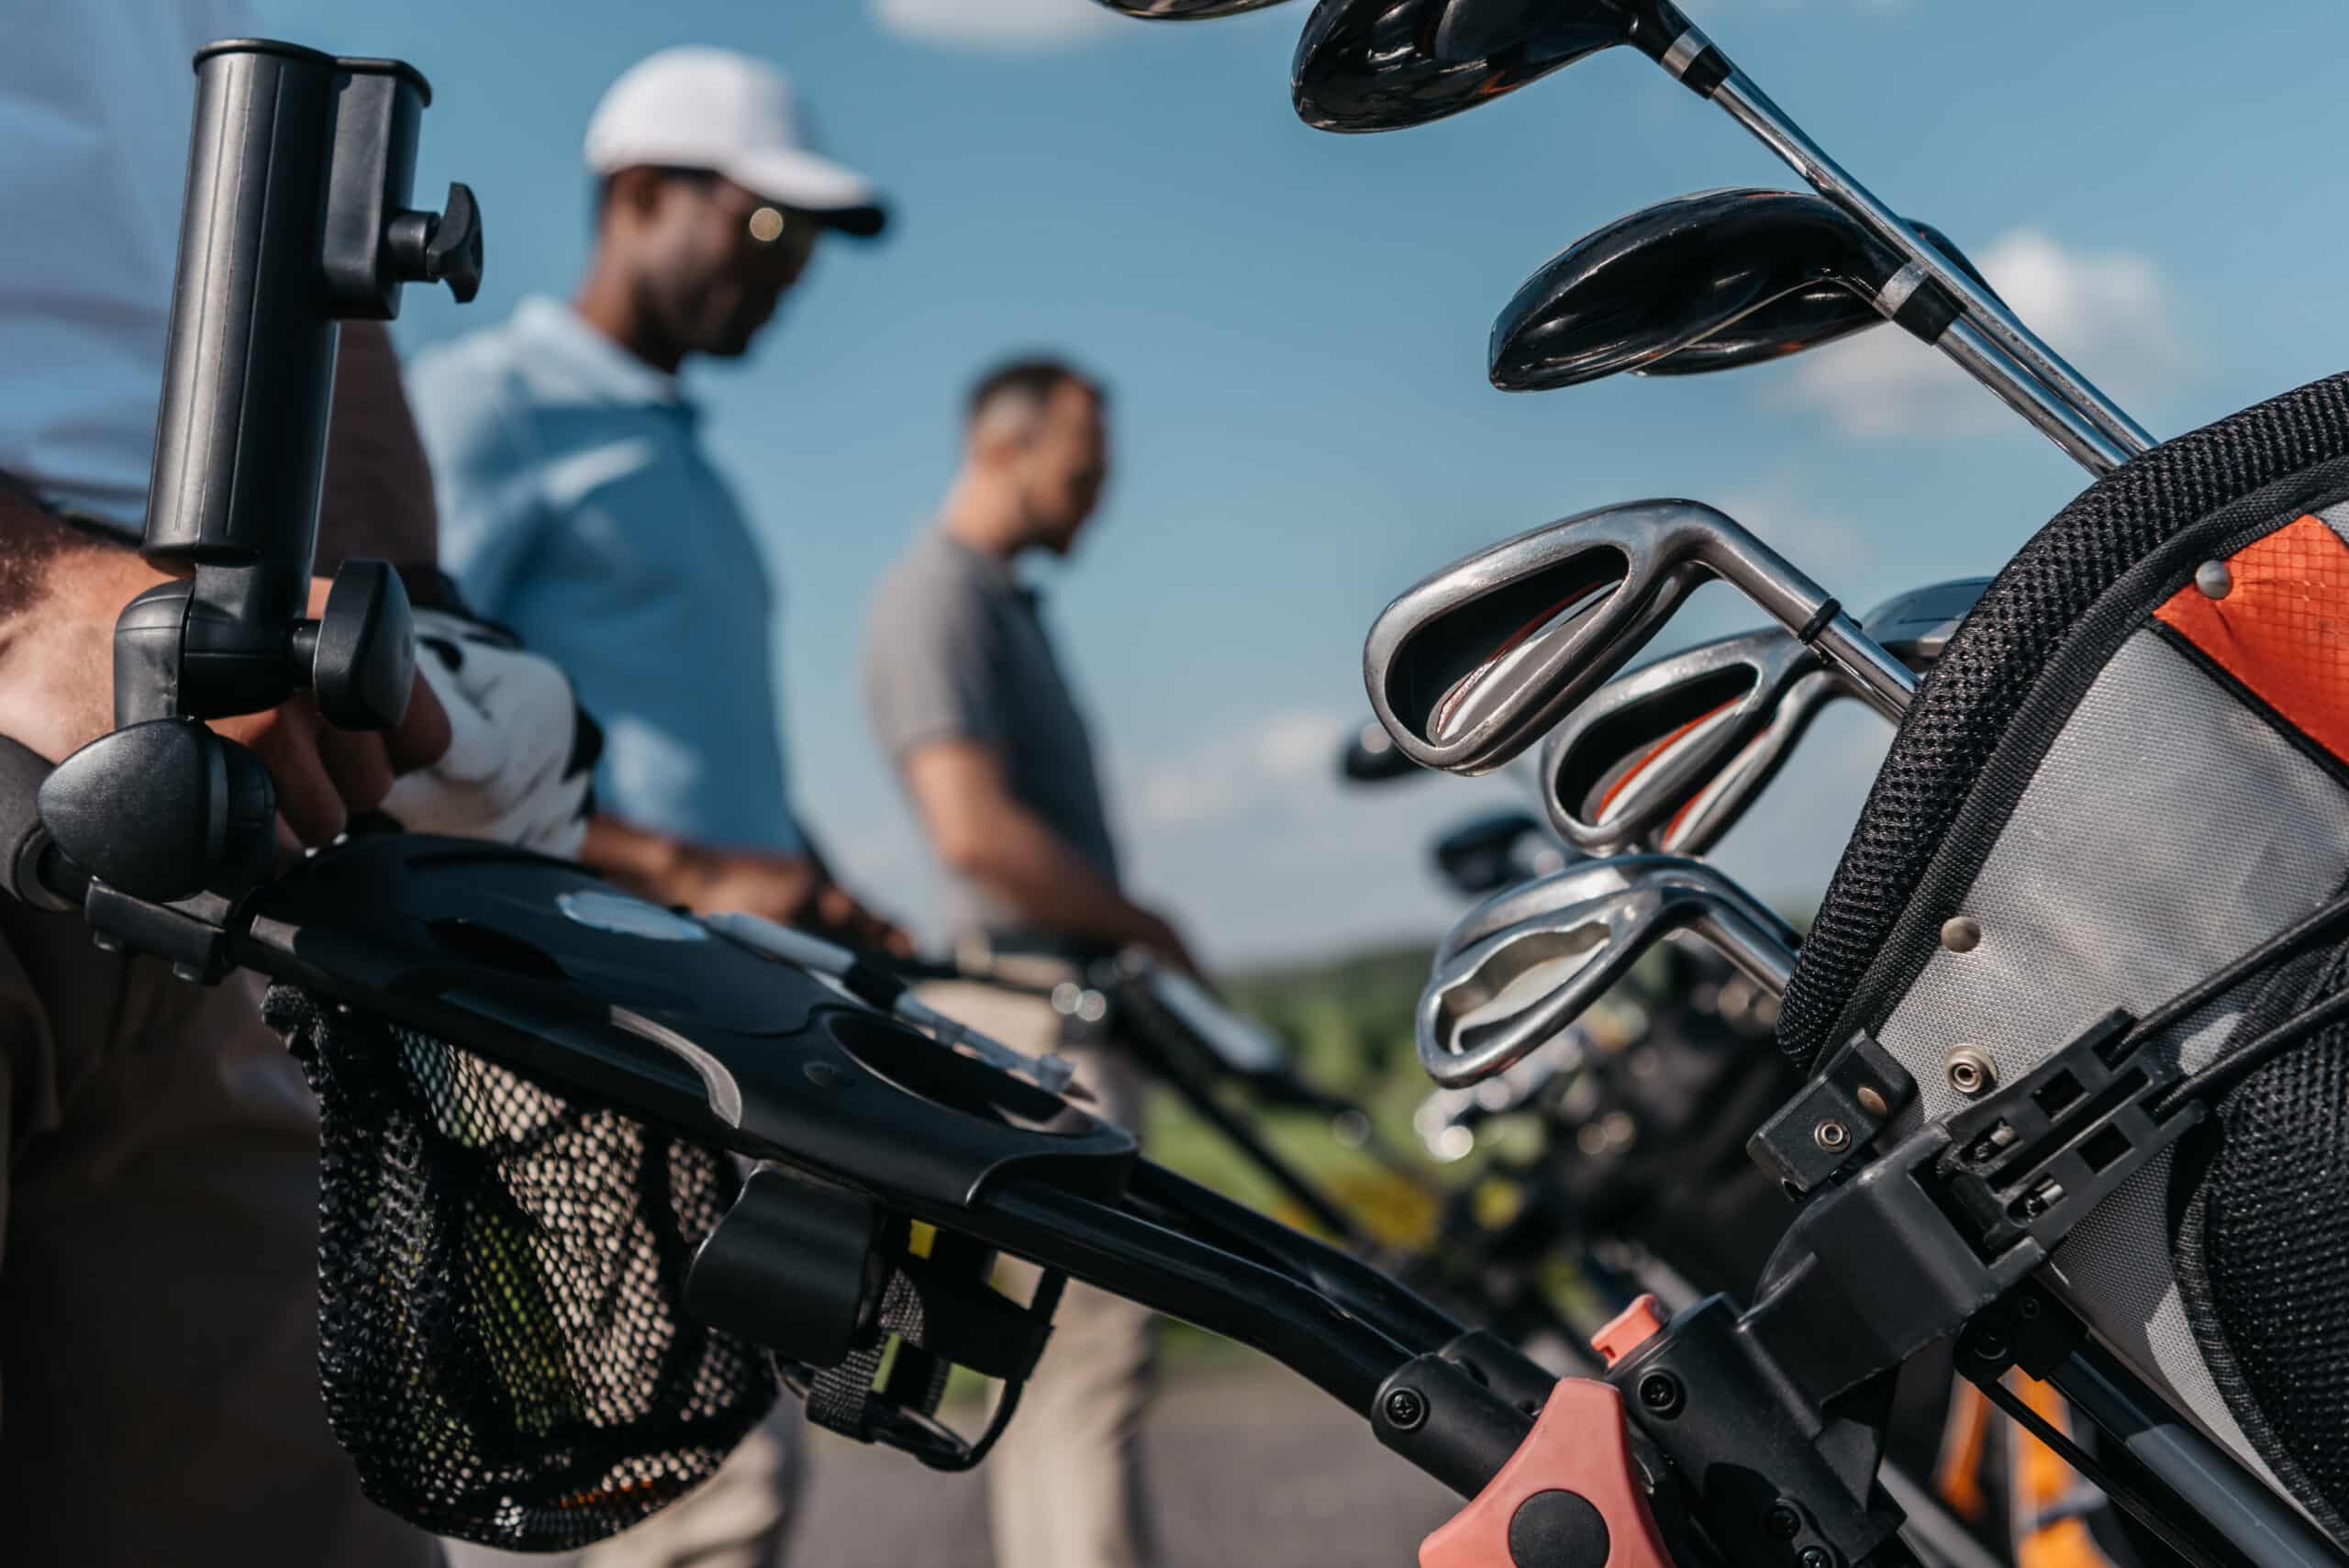 sportsmen going to the golf course, selective focus on bag with clubs at foreground